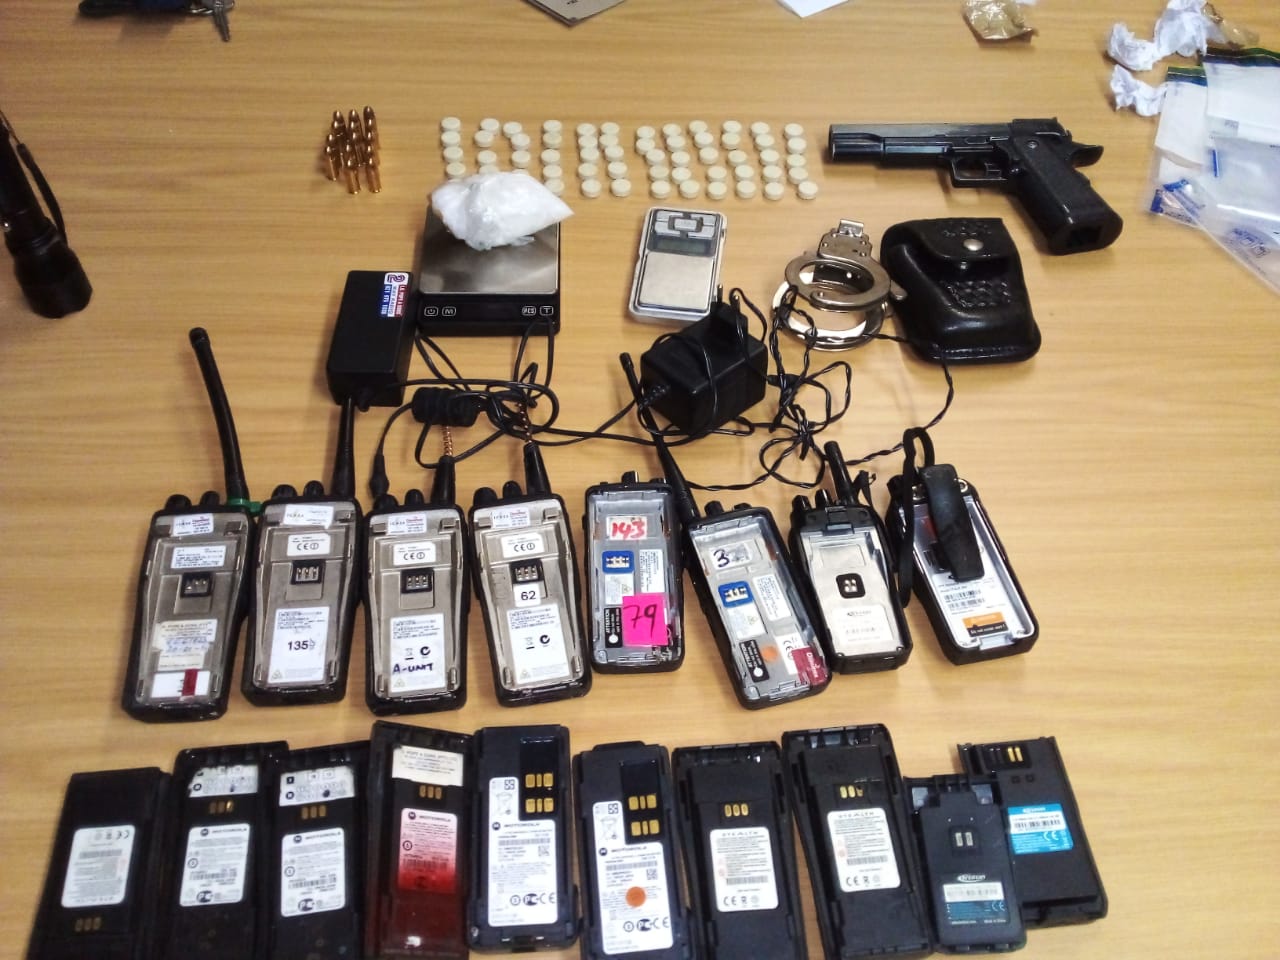 Police arrest suspects with drugs, stolen property and ammunition